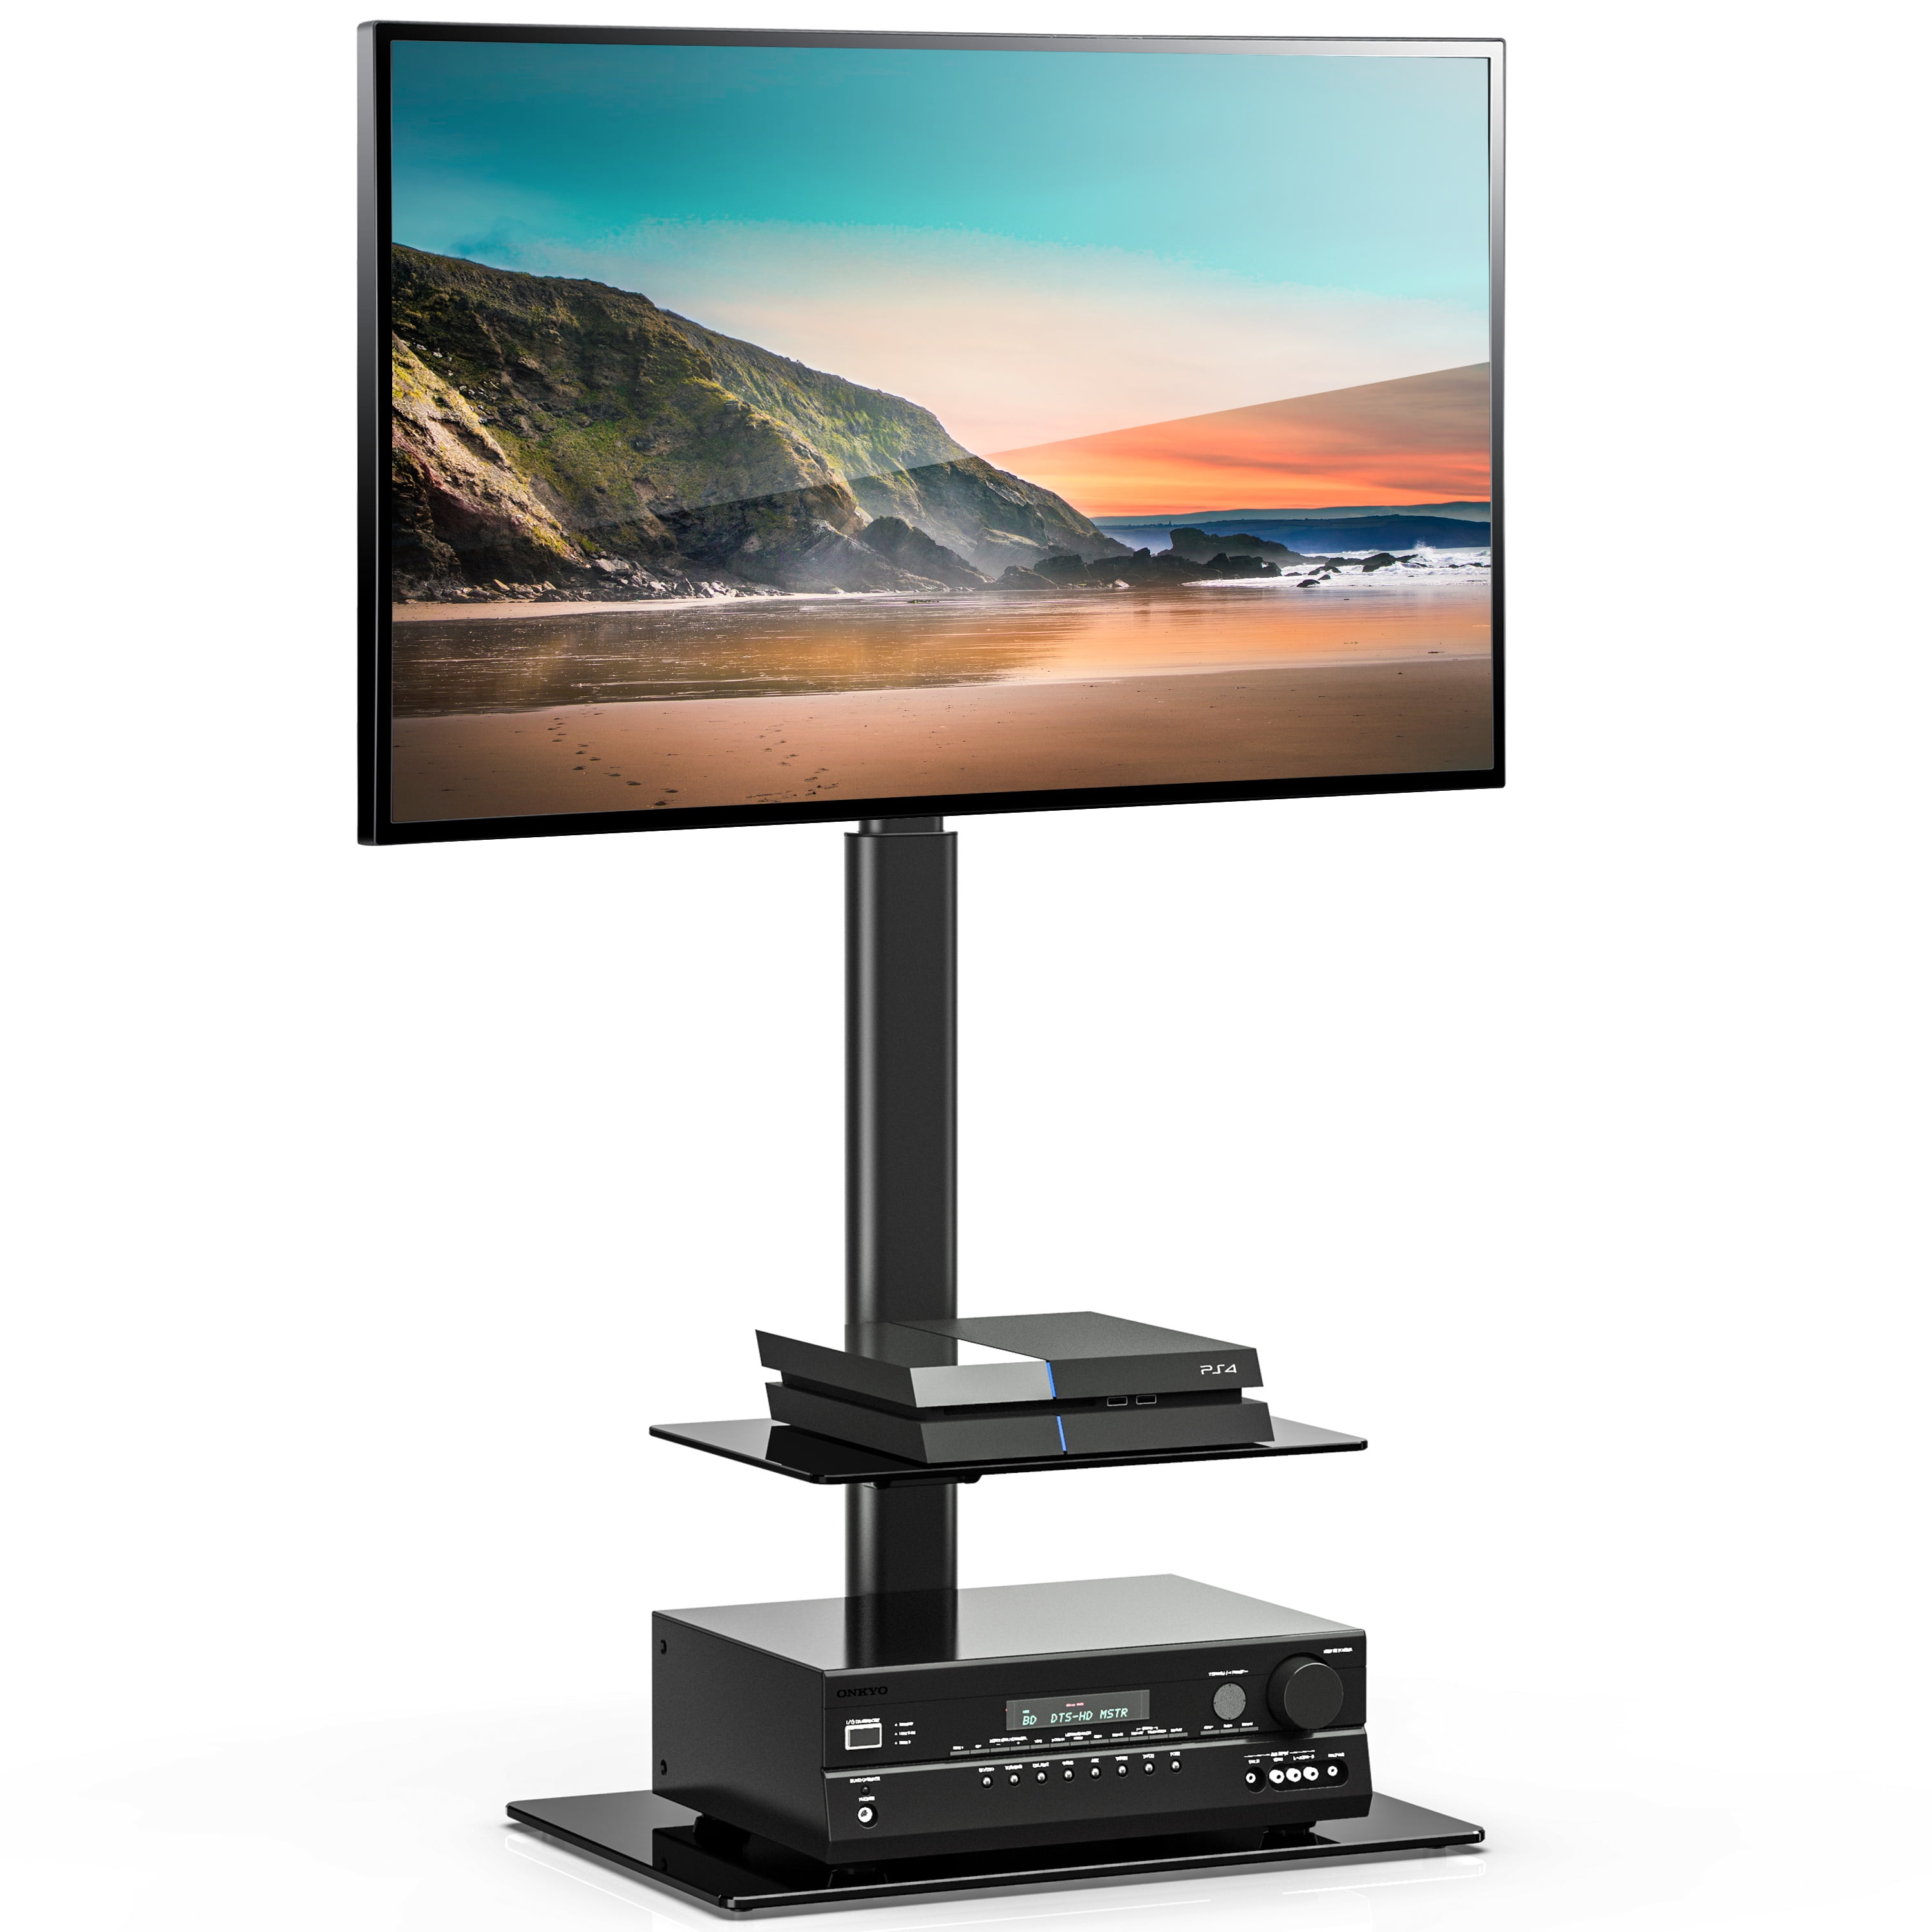 FITUEYES Height Adjustable Black Floor TV Stand for TVs up to 60” with Swivel Mount, TT206001GB